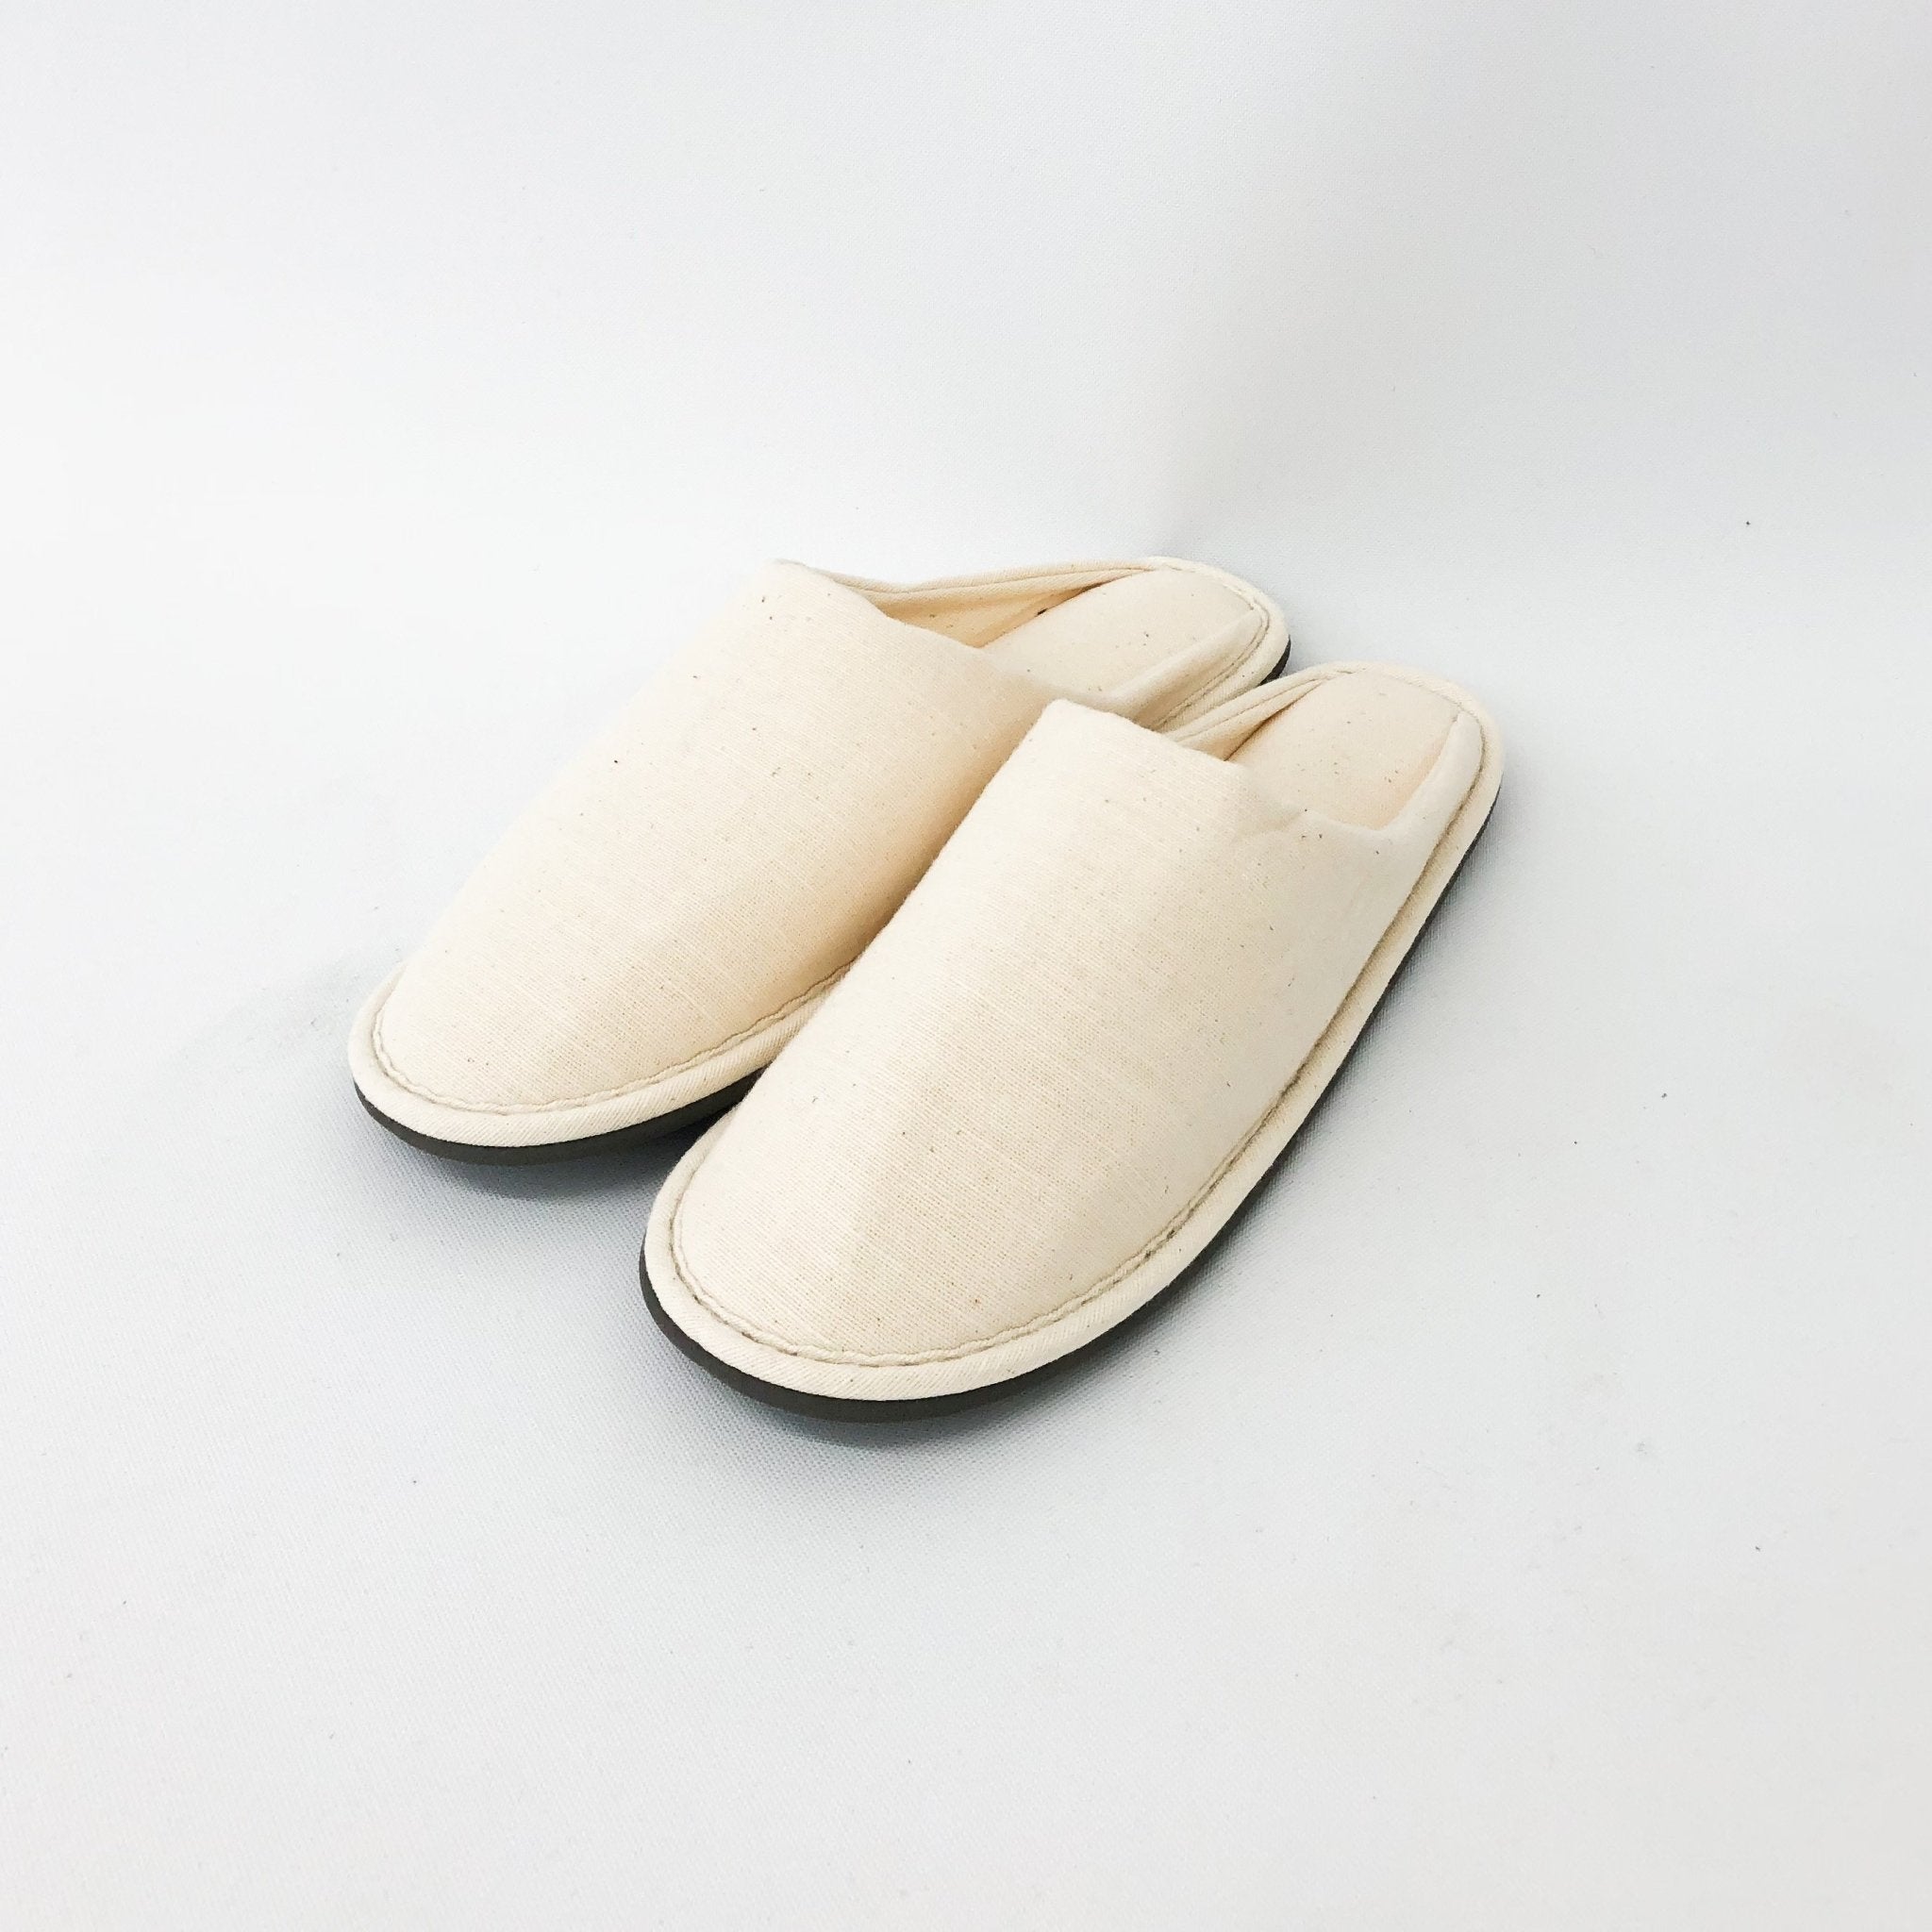 Fstyle Room Slippers - tortoise general store